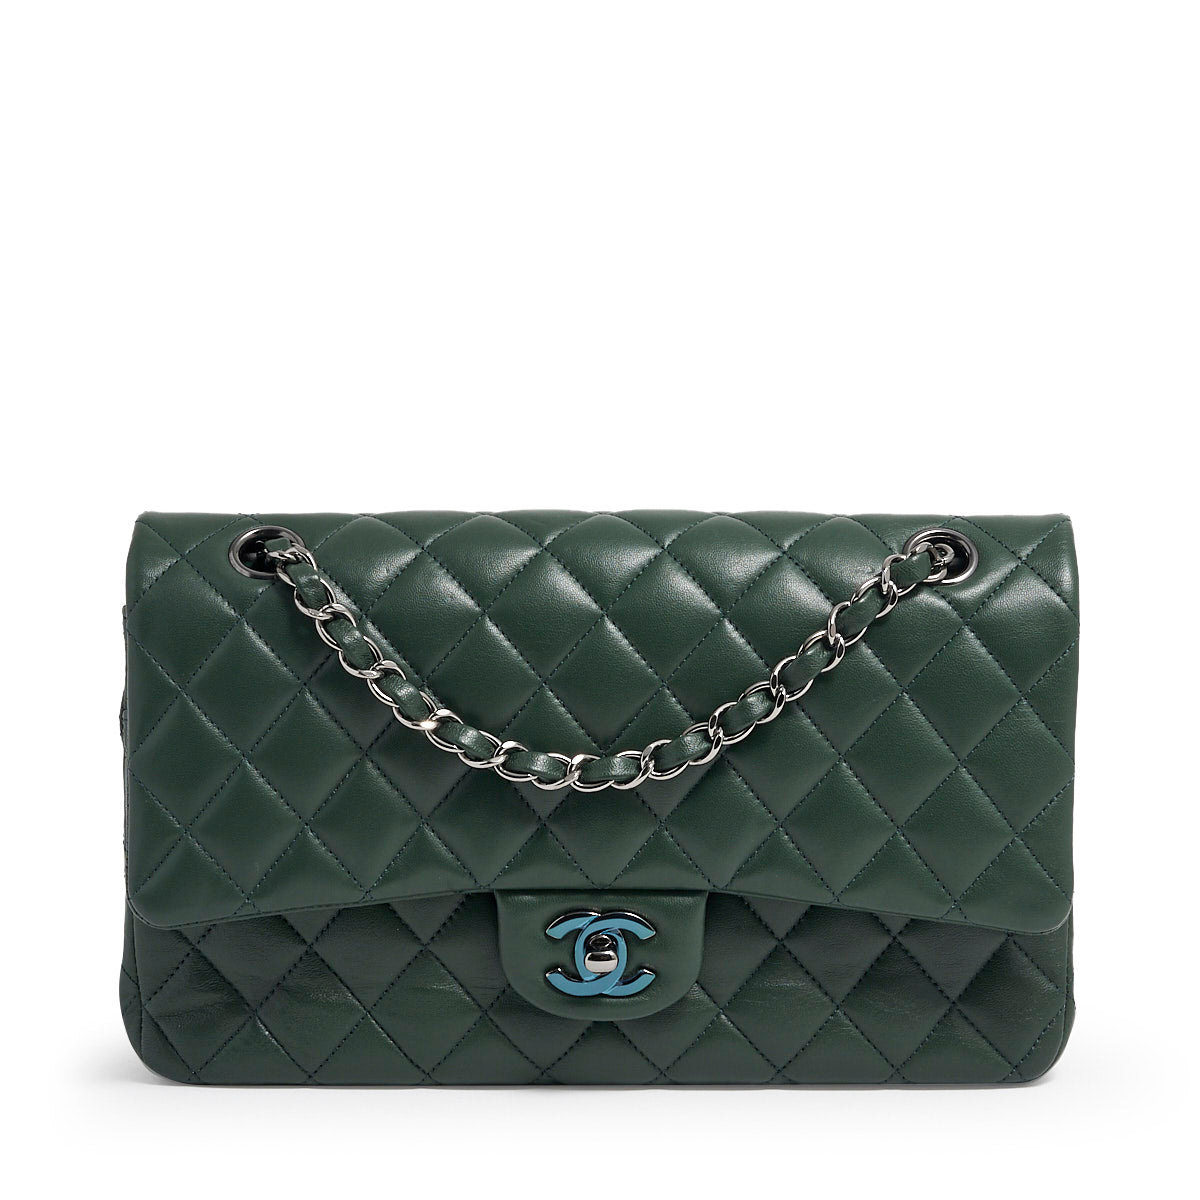 CHANEL Small Trendy CC Flap Bag with Top Handle in Chevron Black Lambskin